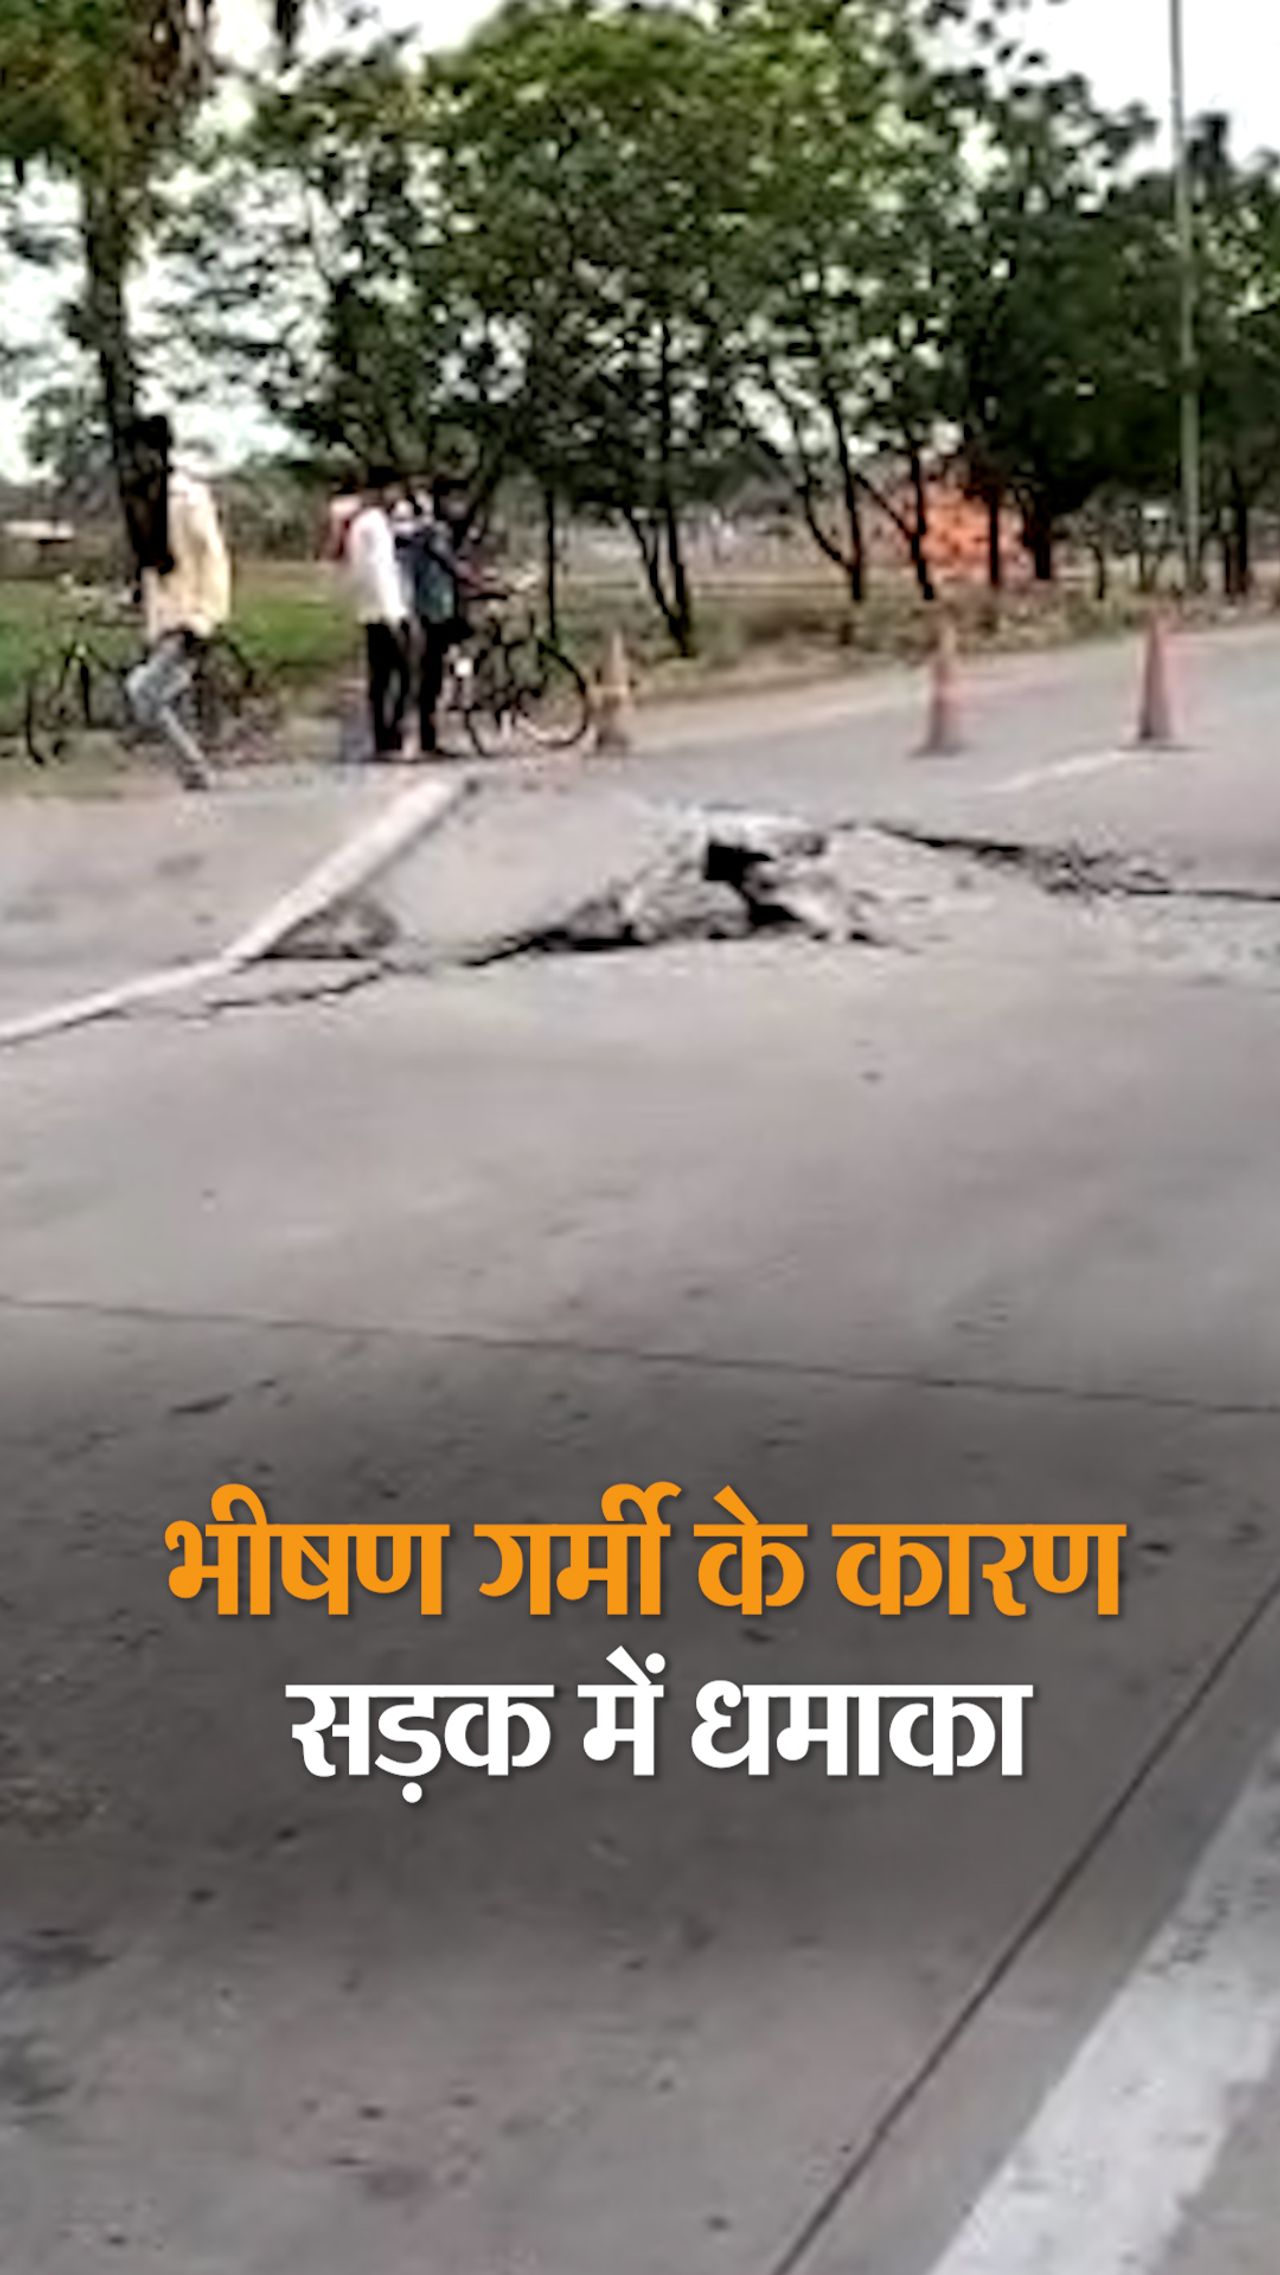 In Rohtas, Bihar, the road suddenly exploded with a loud noise.